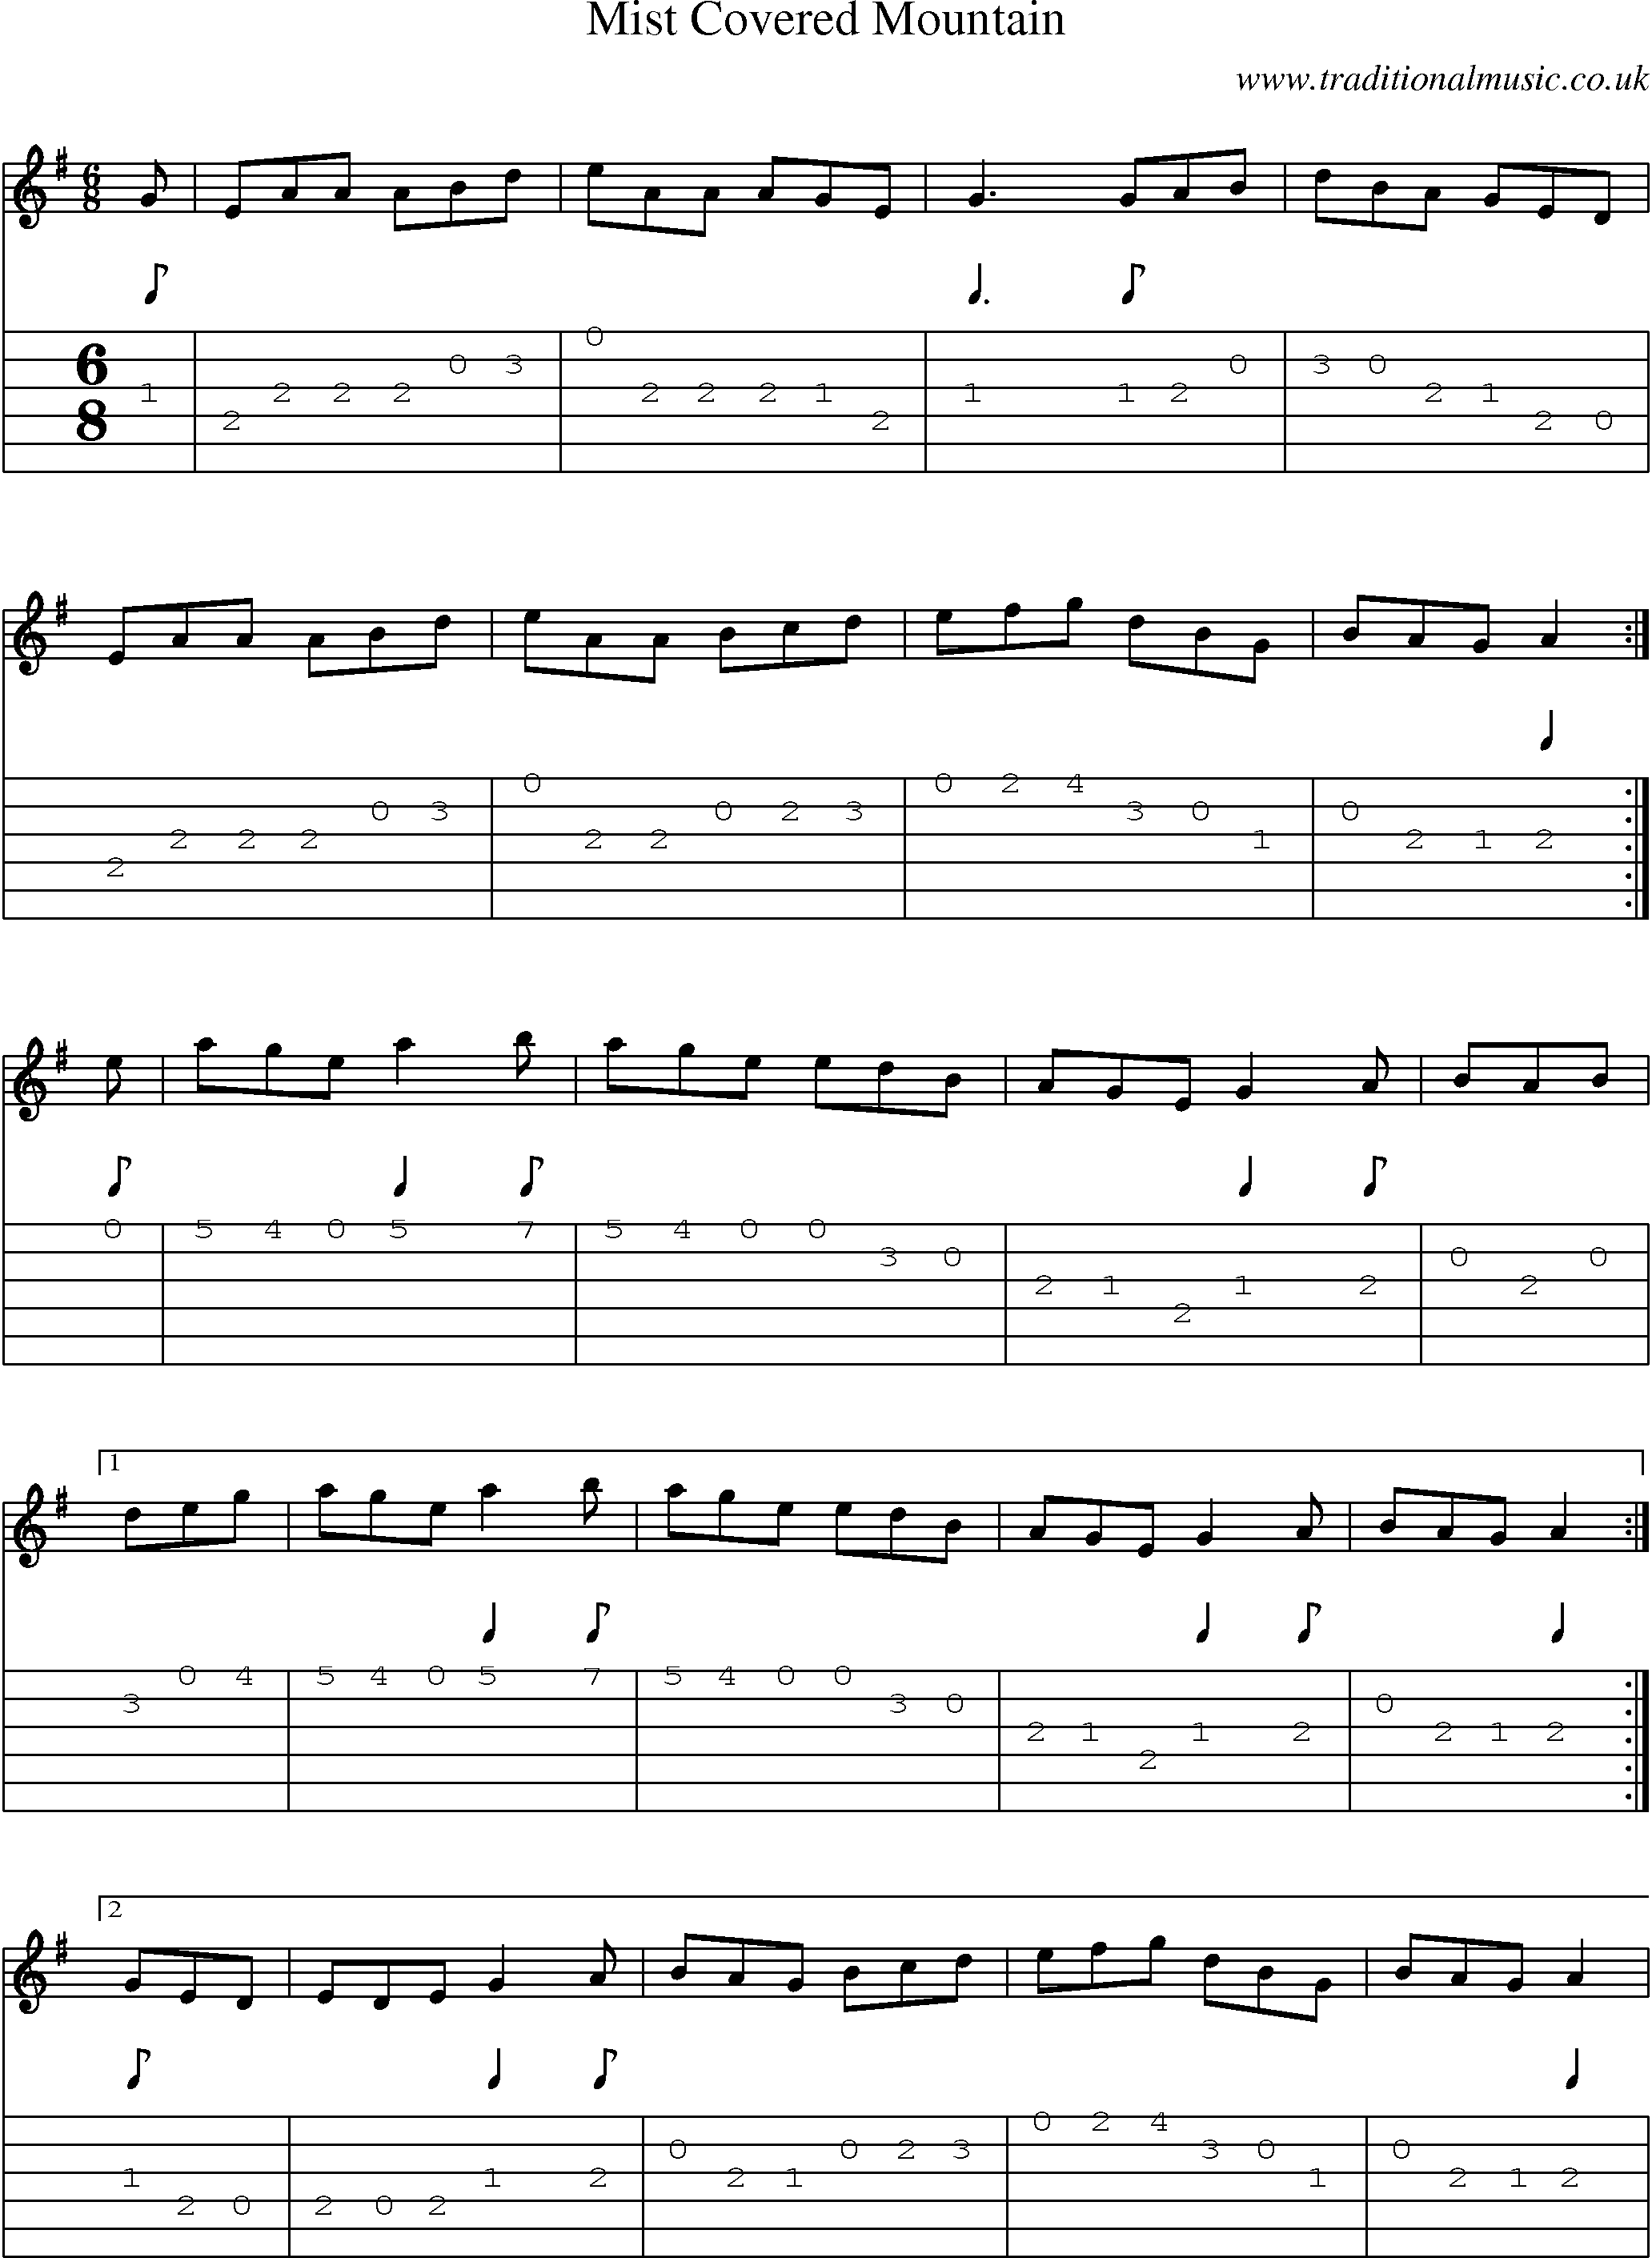 Music Score and Guitar Tabs for Mist Covered Mountain